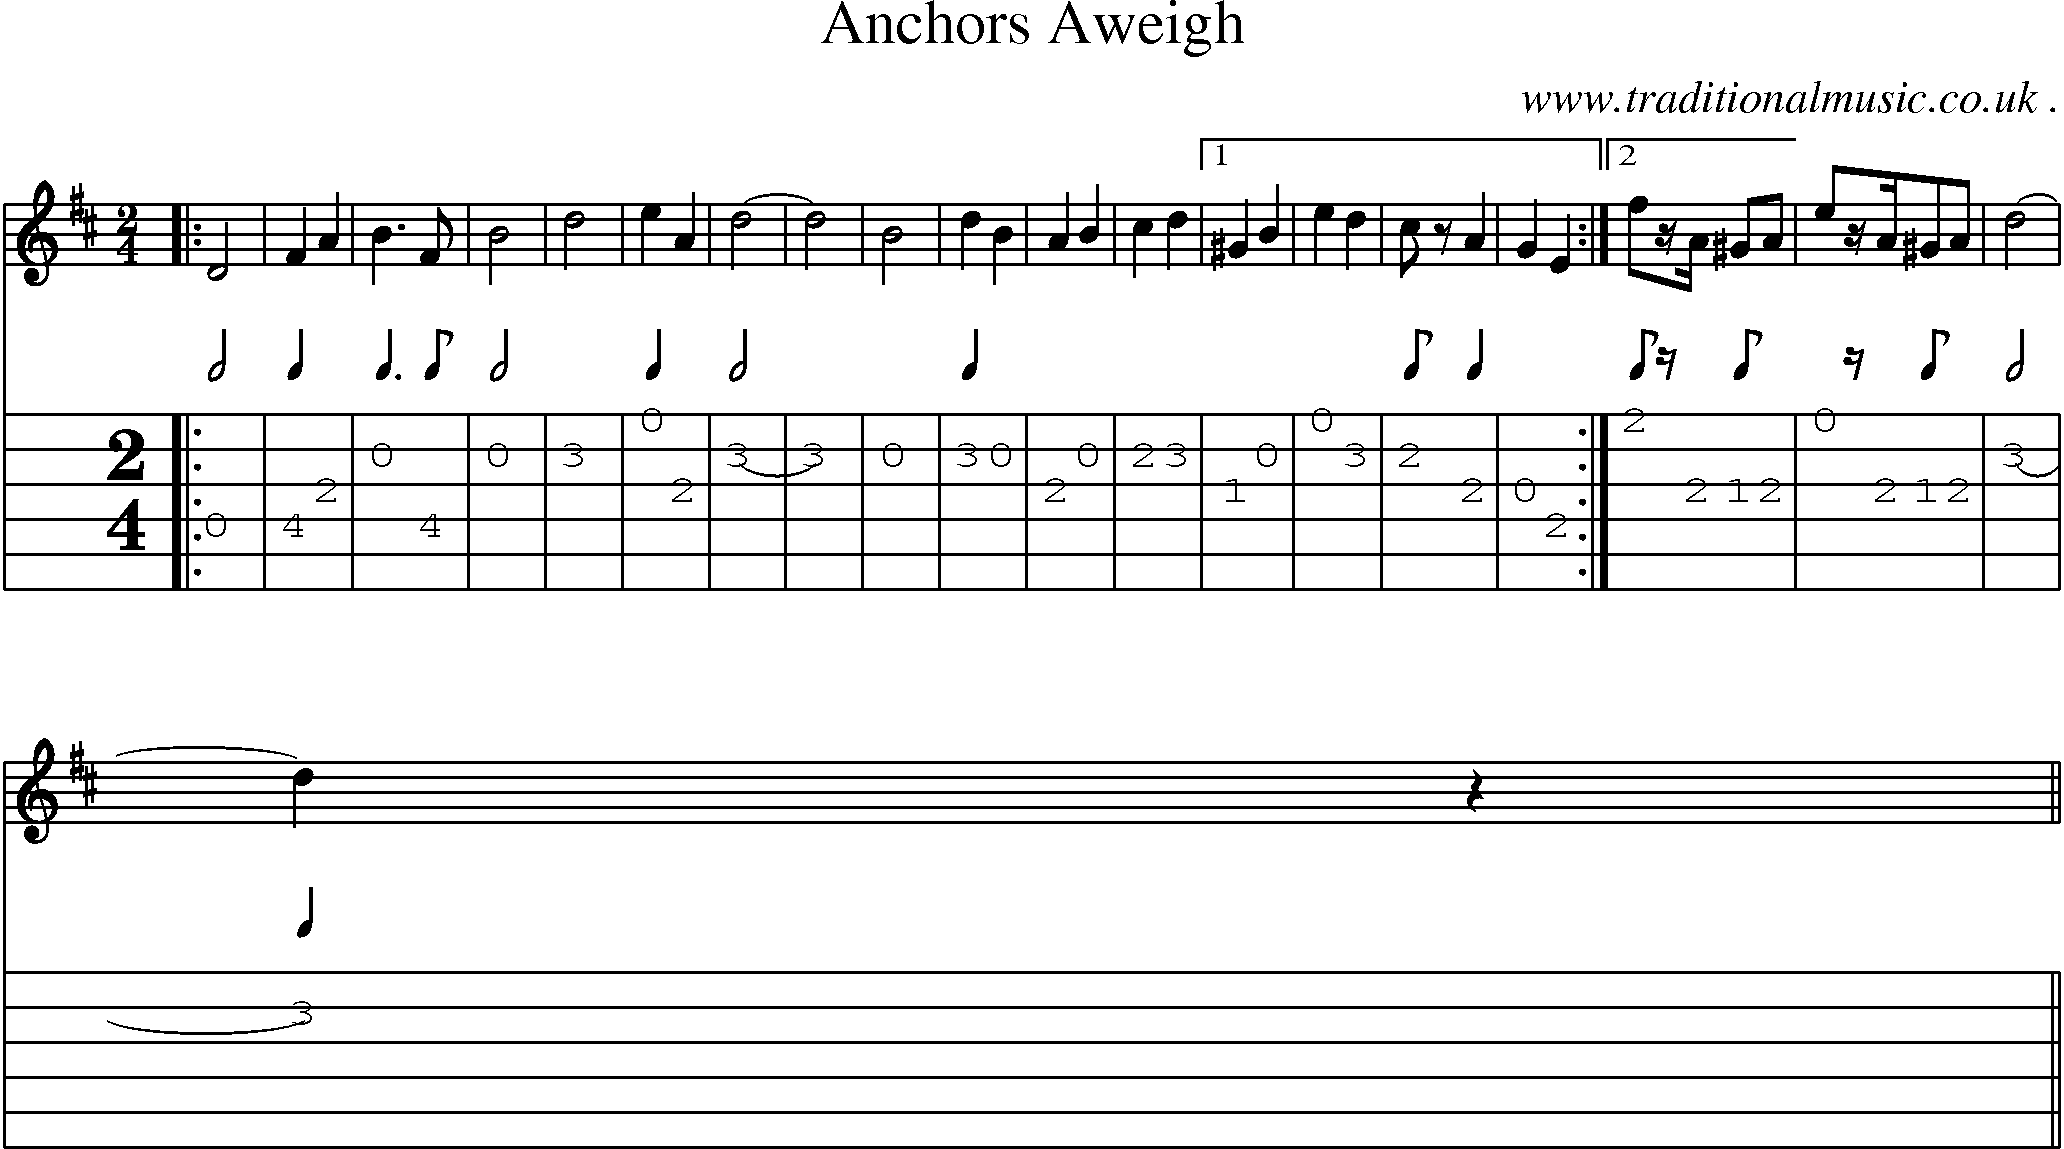 Music Score and Guitar Tabs for Anchors Aweigh